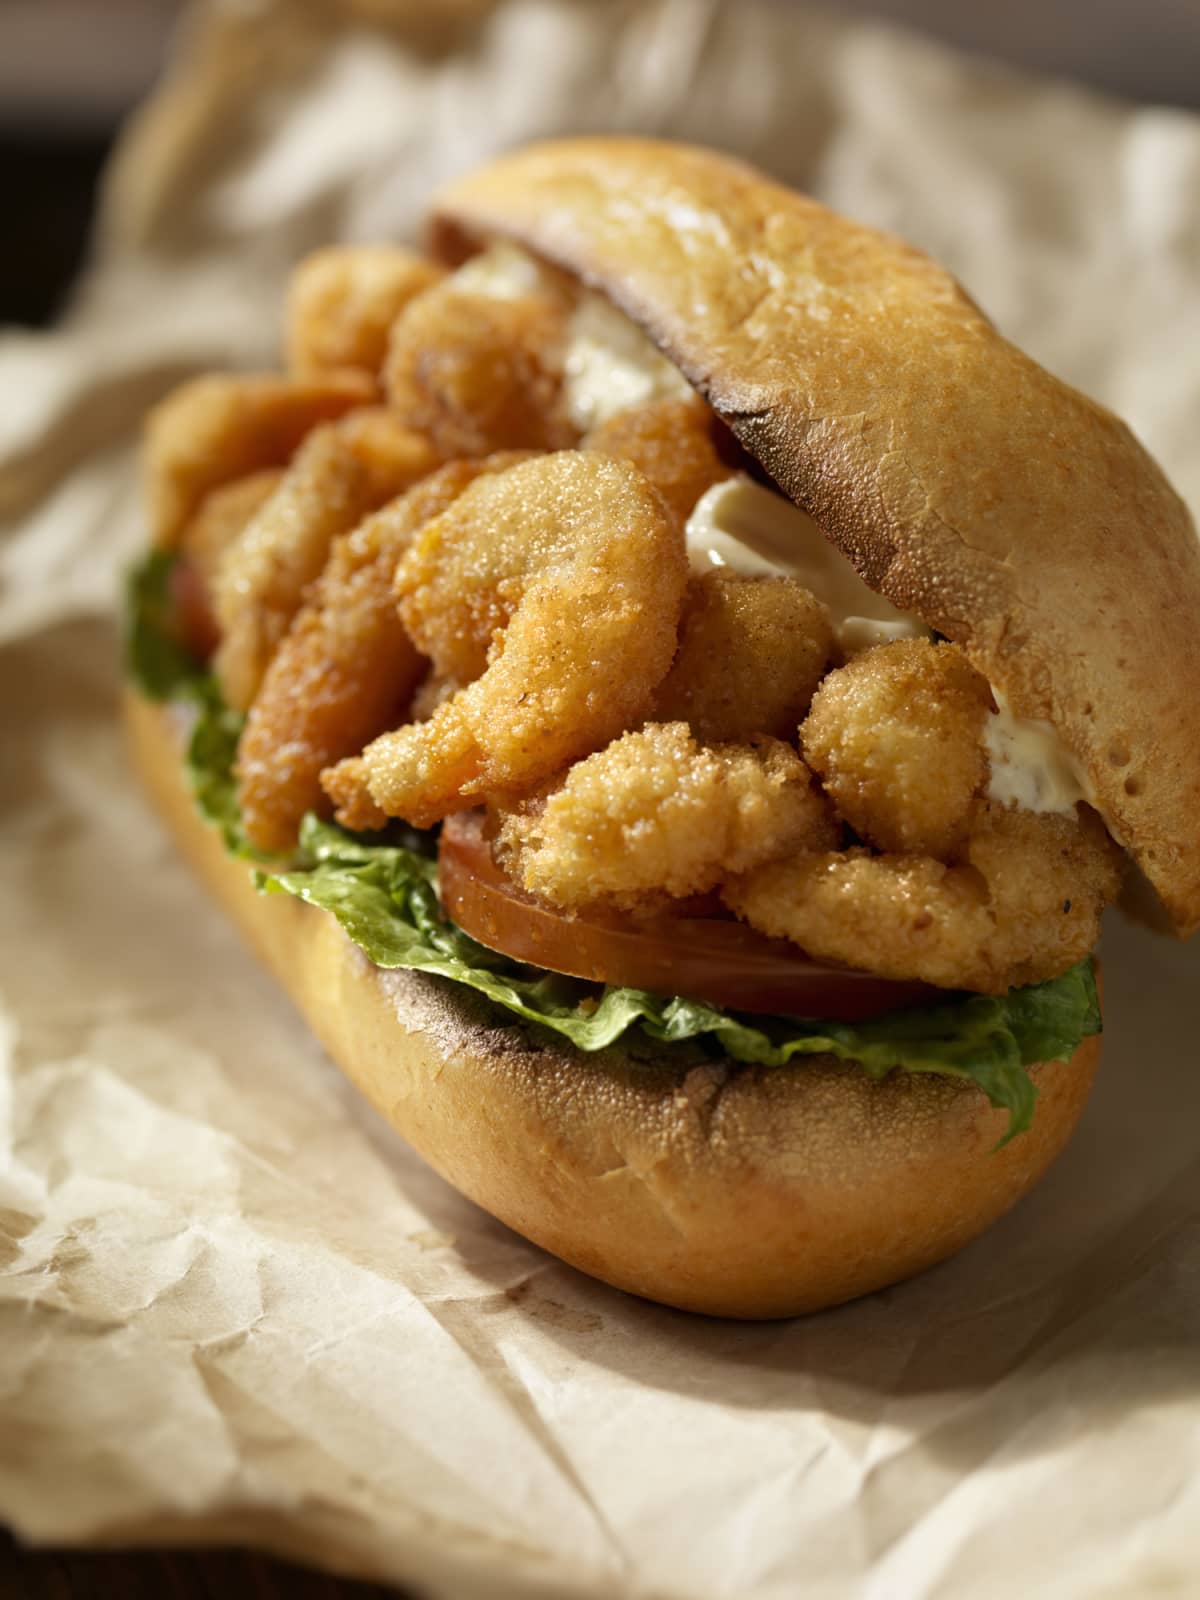 Shrimp Po Boy Sandwich on a Toasted Crusty French Roll with Lettuce, Tomato and Mayo